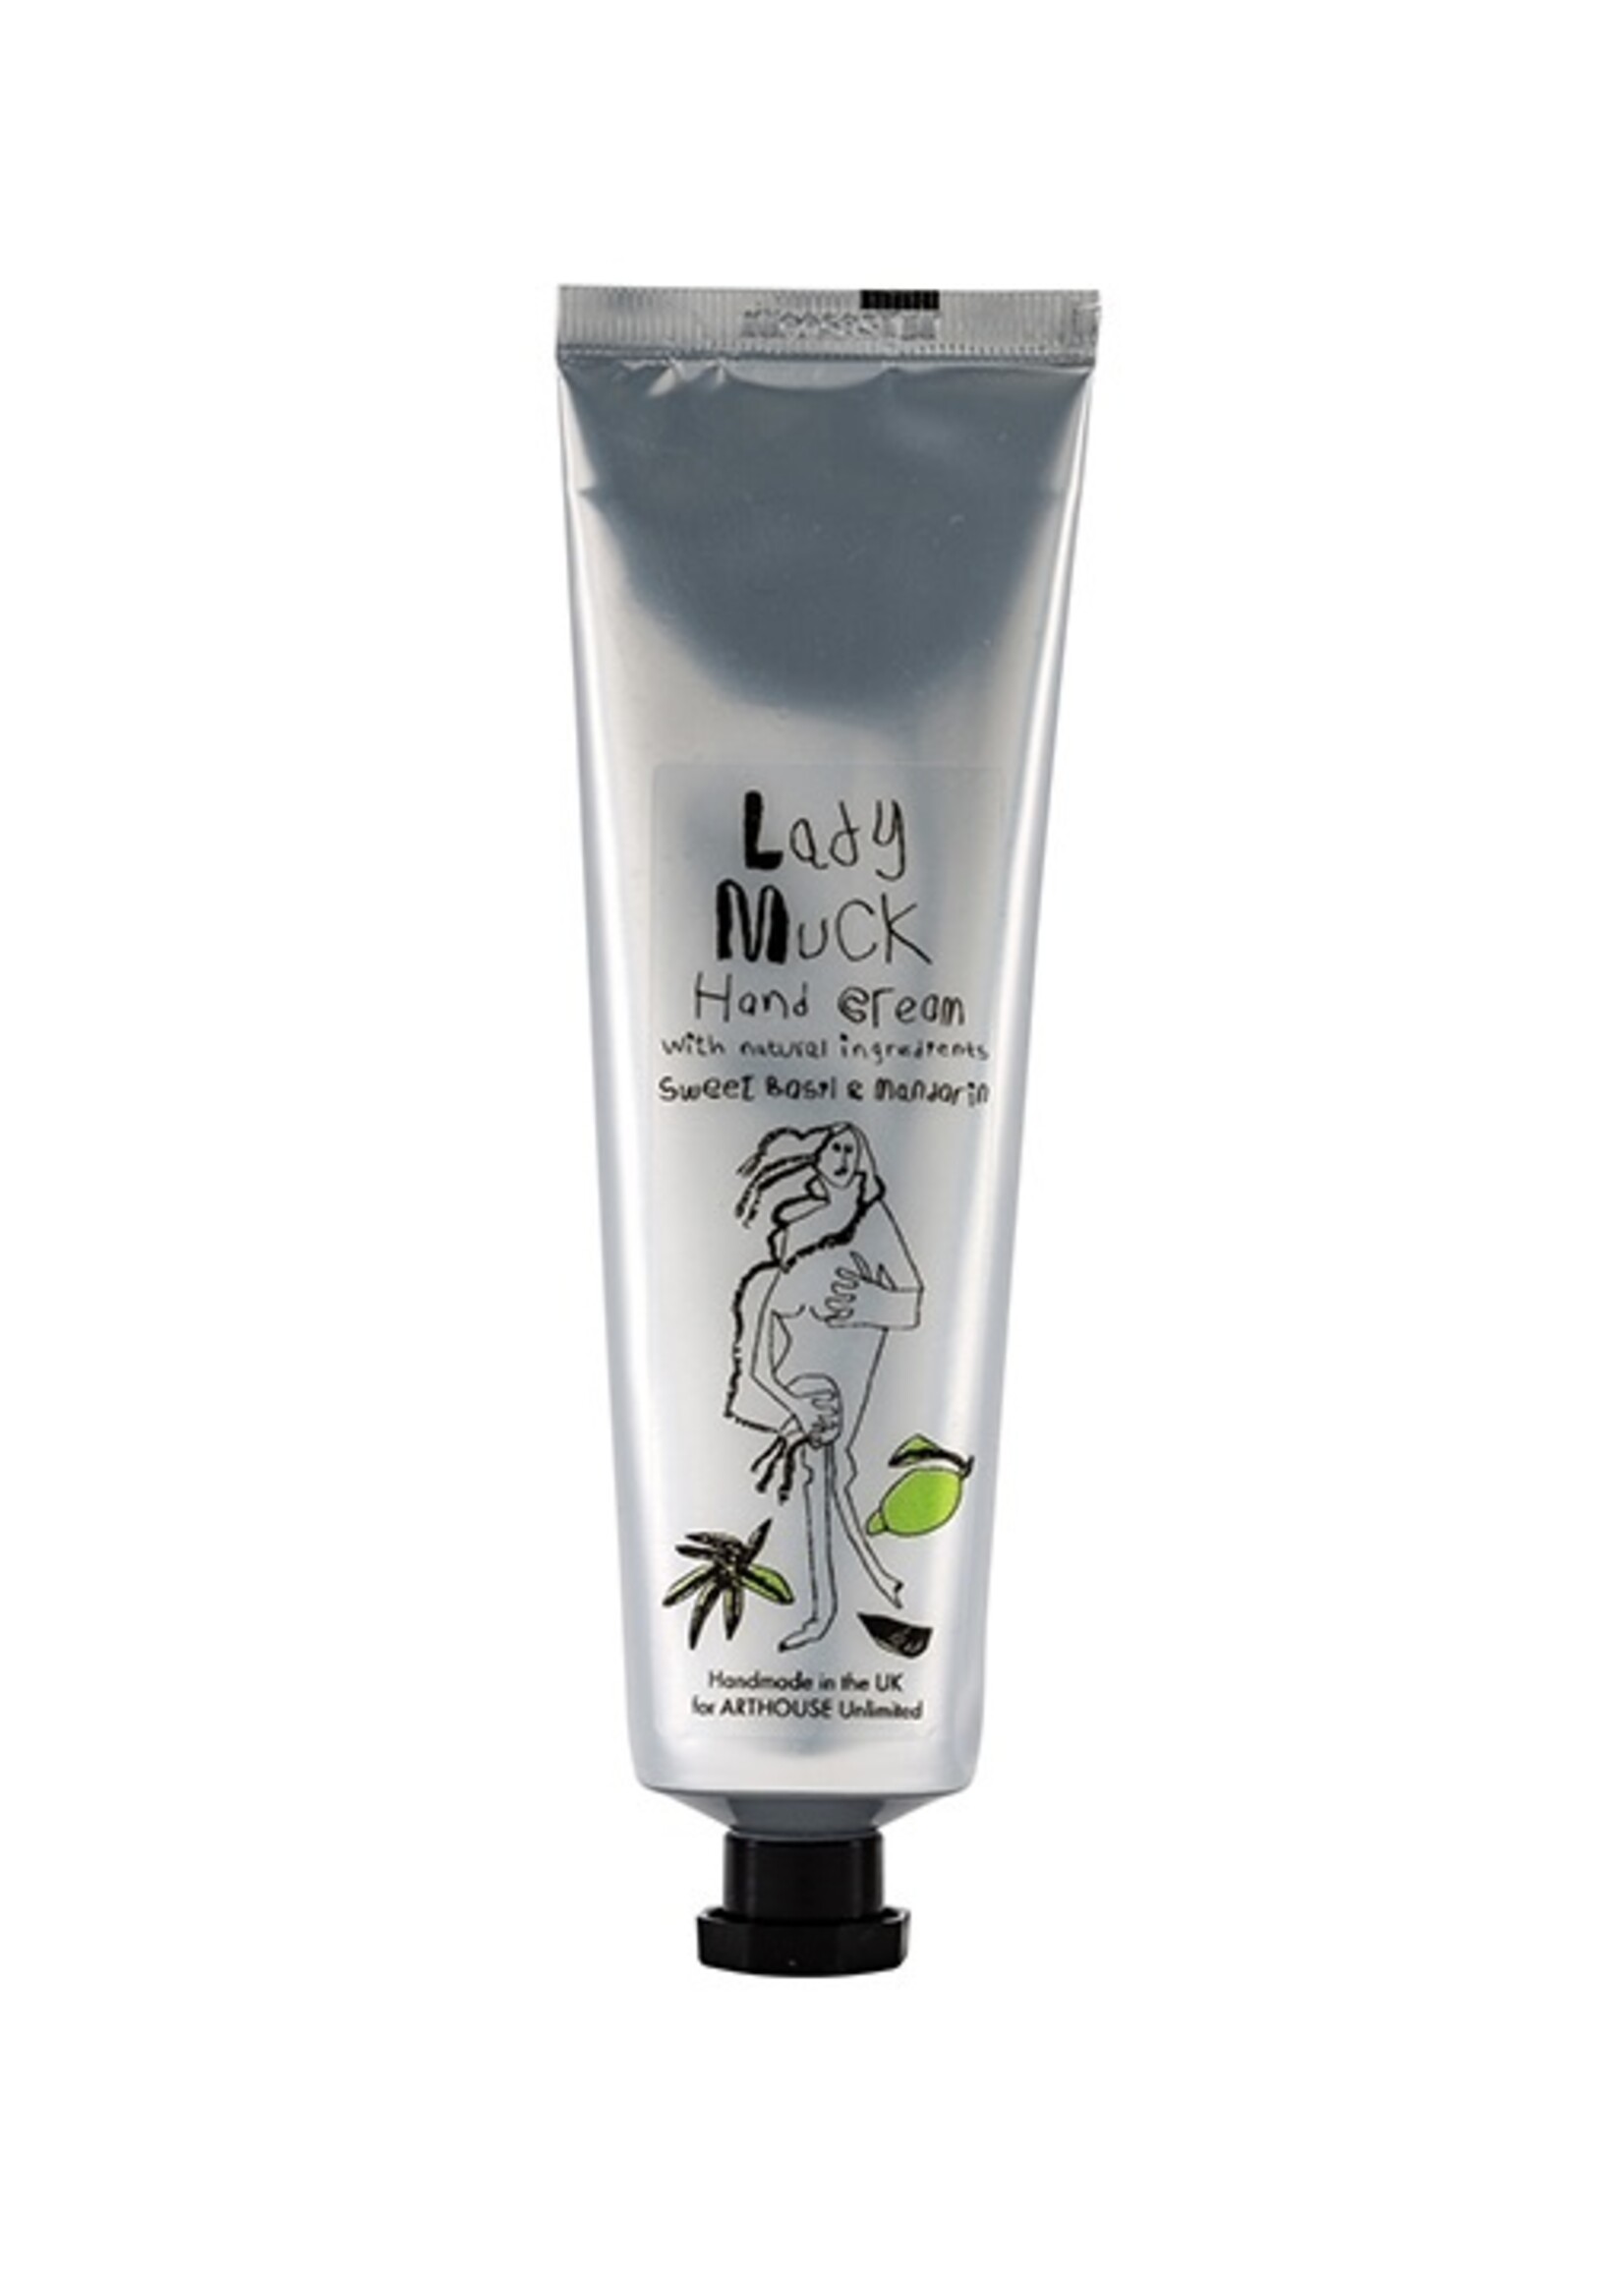 Arthouse  Unlimited Hand creams "Lady Muck" by Arthouse Unlimited